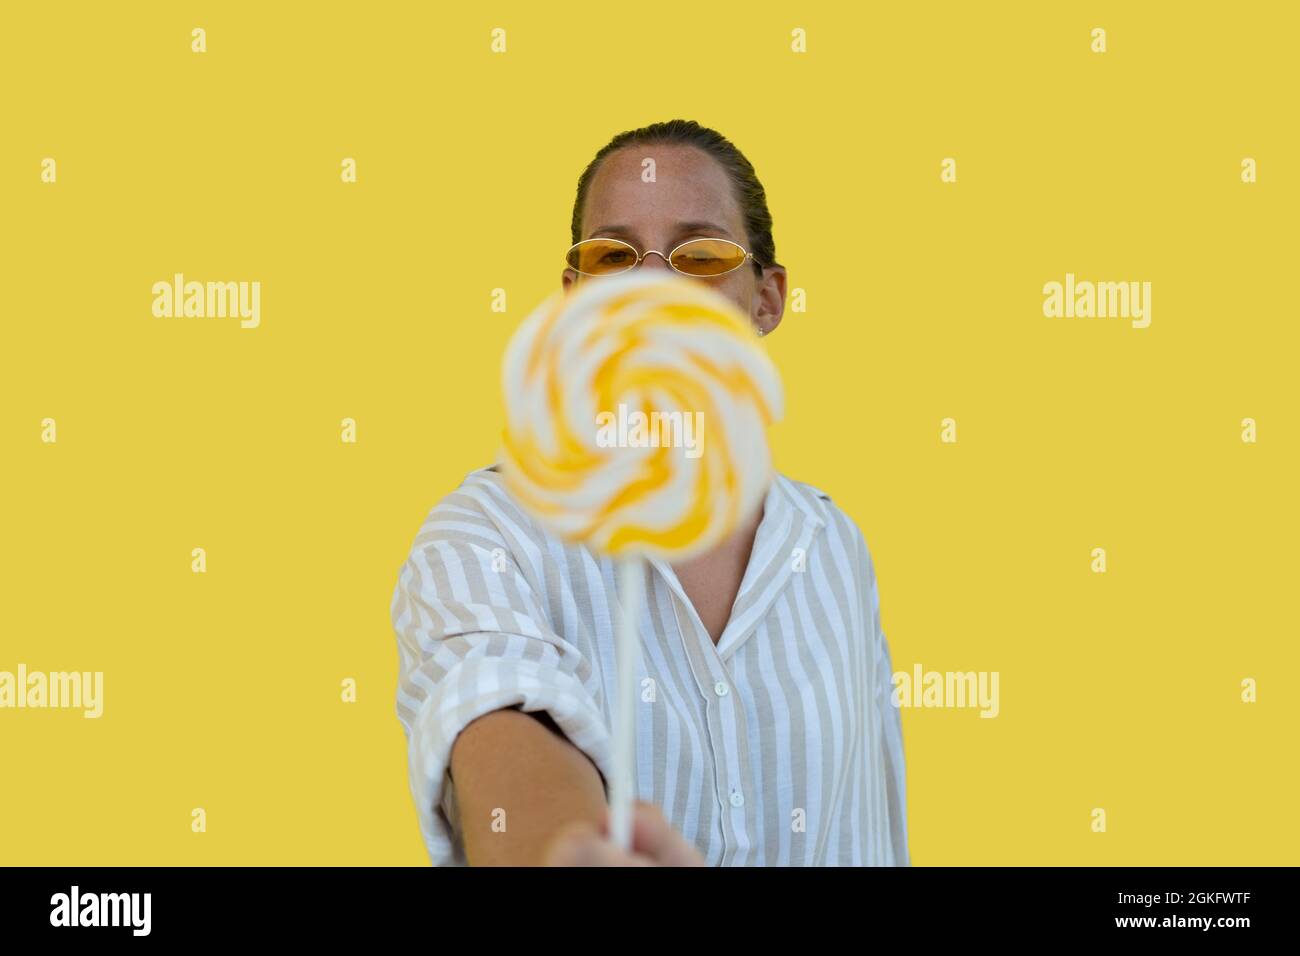 Woman in yellow sunglasses with sweet candy lollypop on yellow background Stock Photo